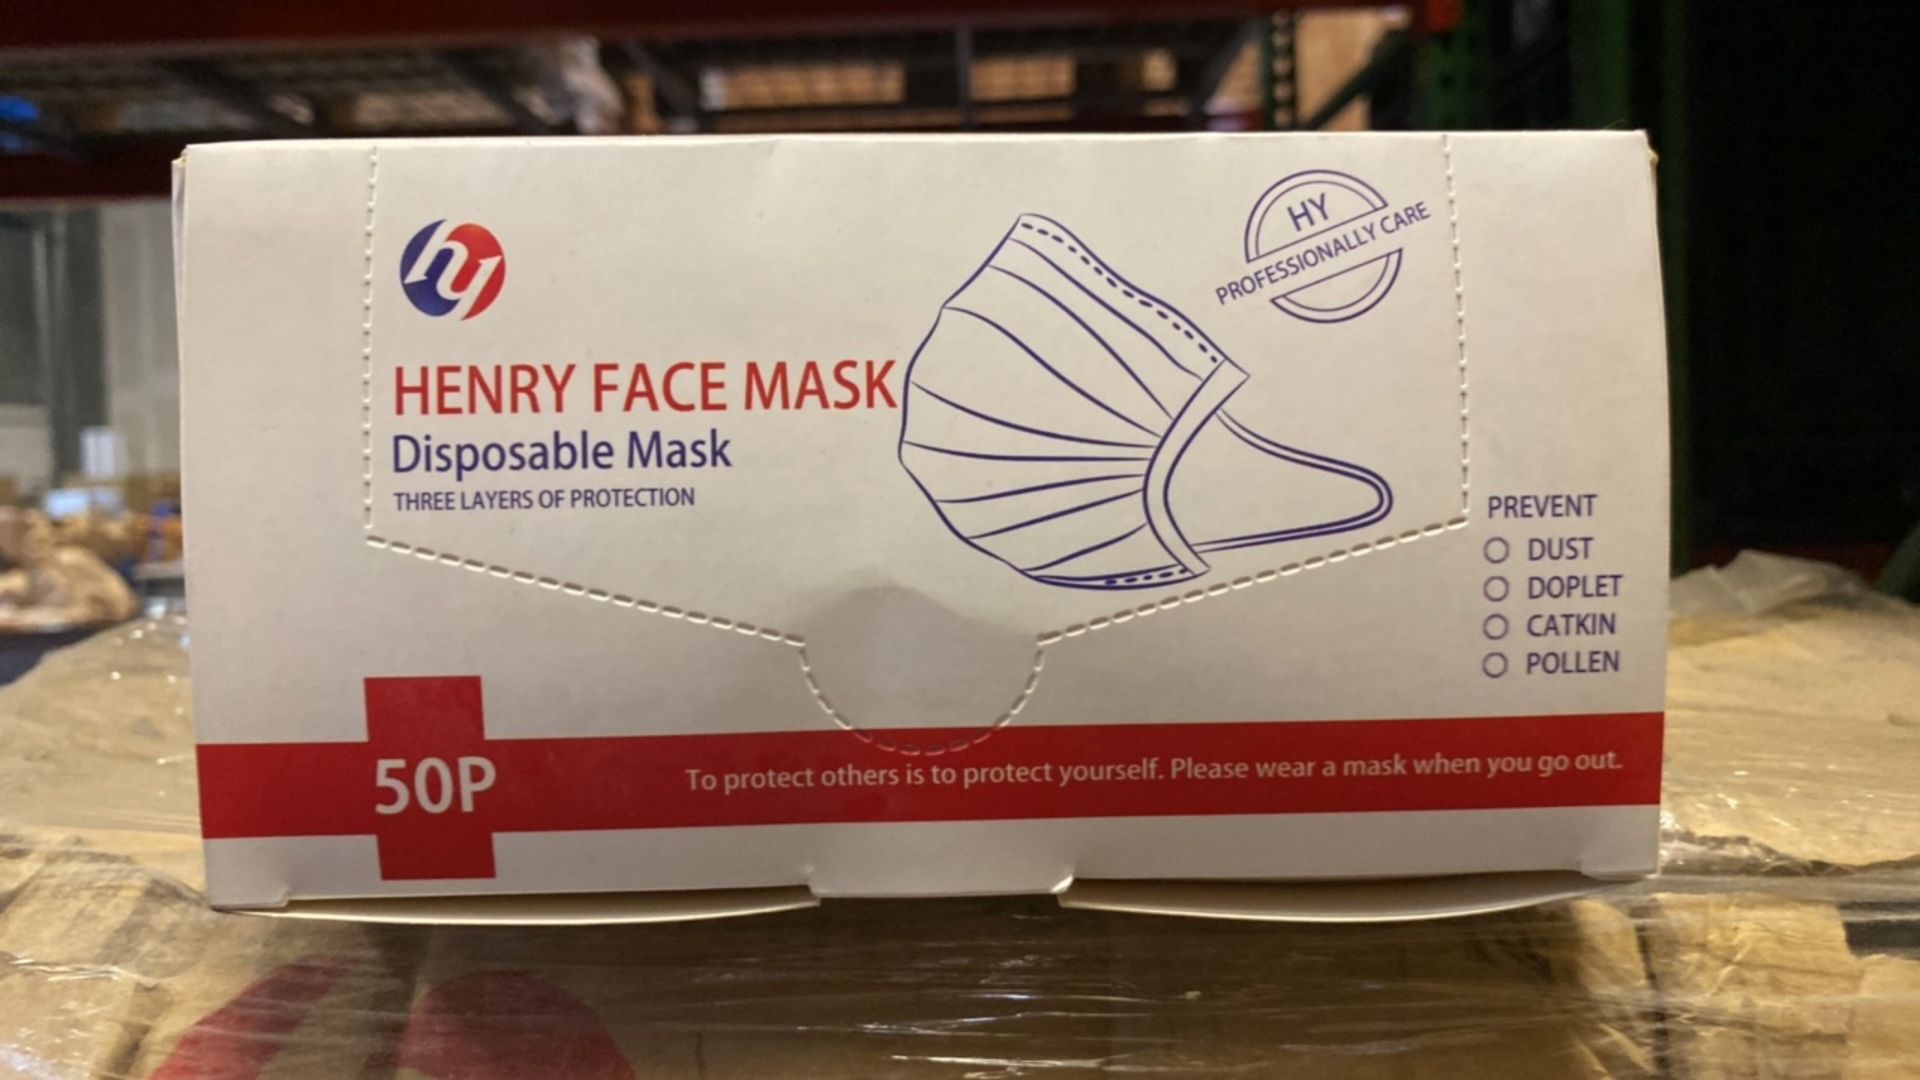 HENRY 50P NON-MEDICAL EARLOOP FACE MASK QTY:13 CASES 40 X 50 PER CASE